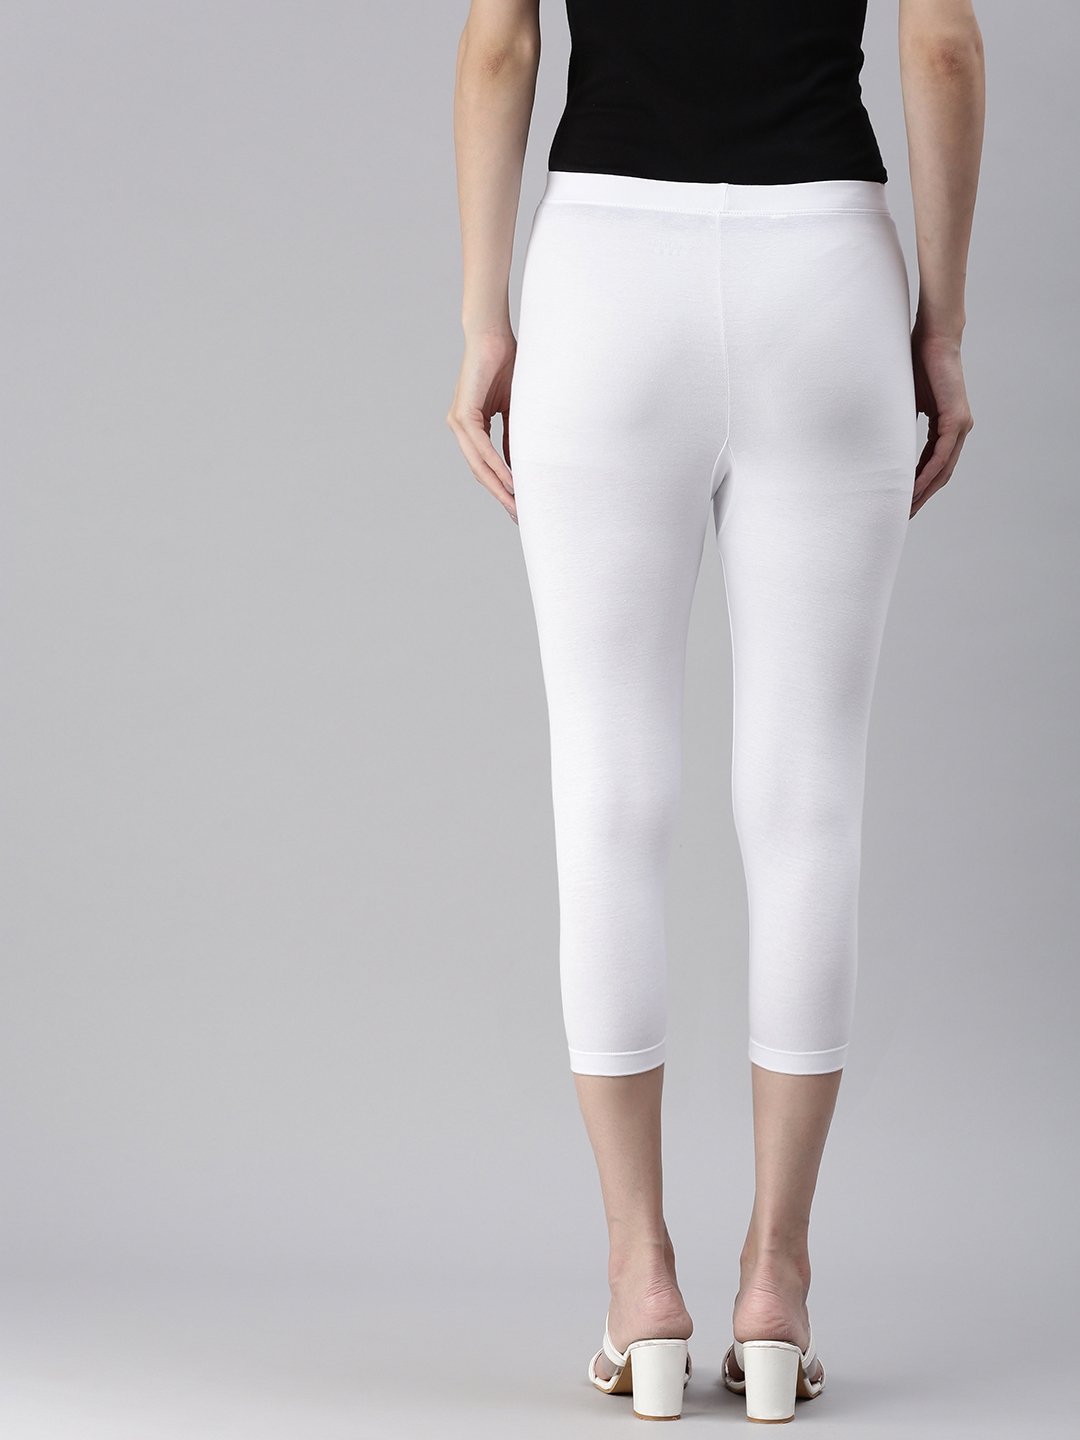 Kryptic | Kryptic Women Cotton Stretched Solid  White Mid-Ankle length Legging 2